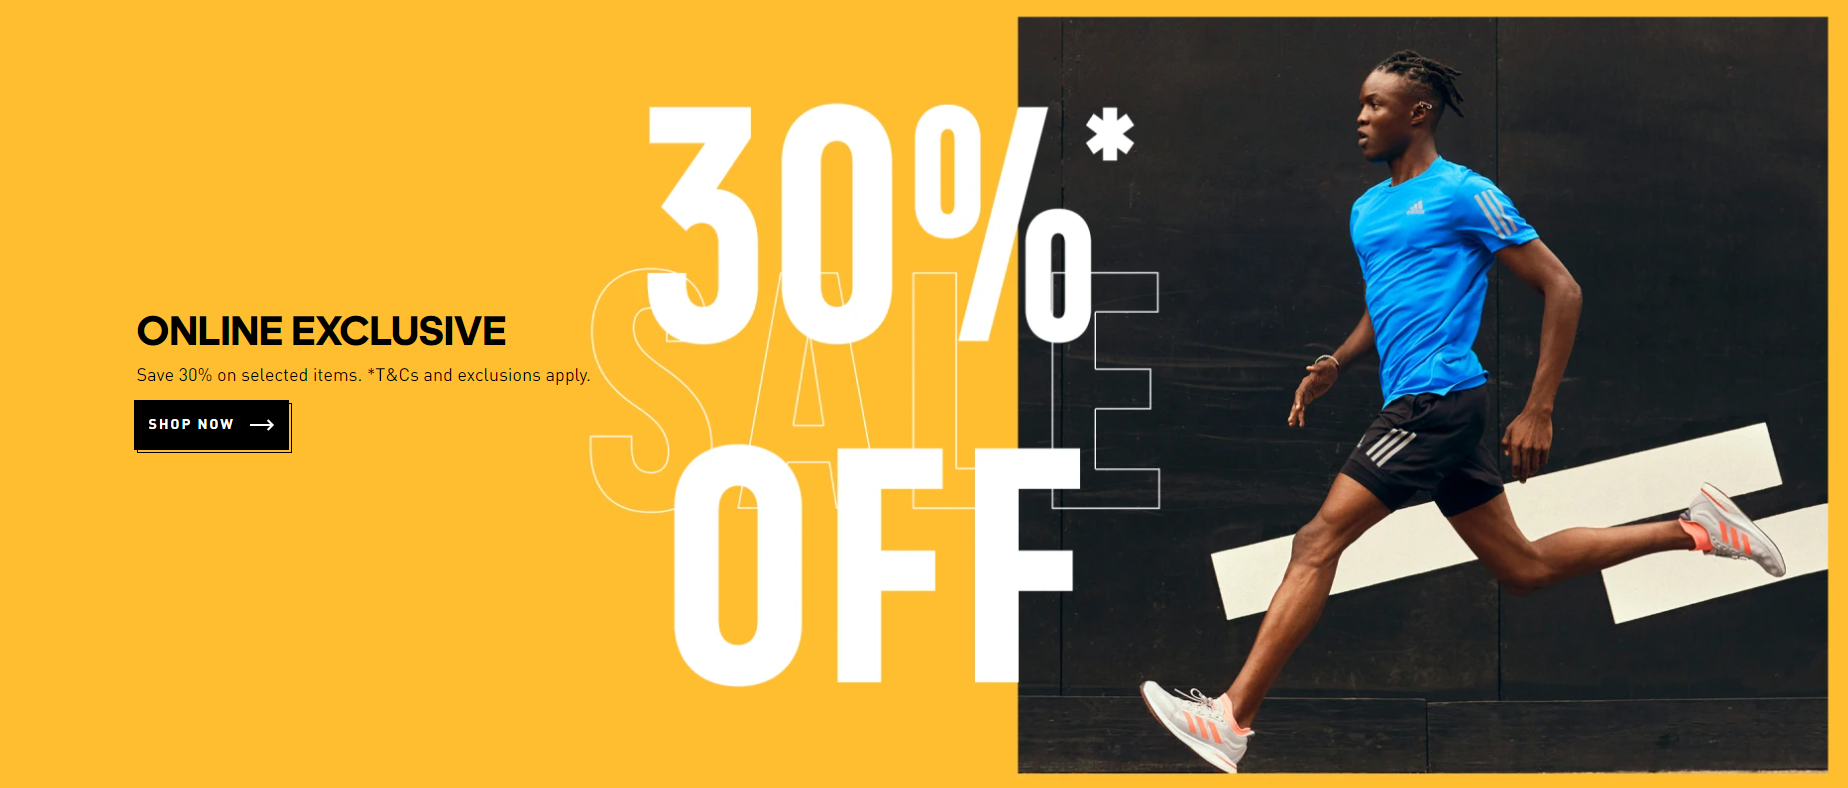 30% OFF Adidas Click Frenzy sale on clothing and footwear